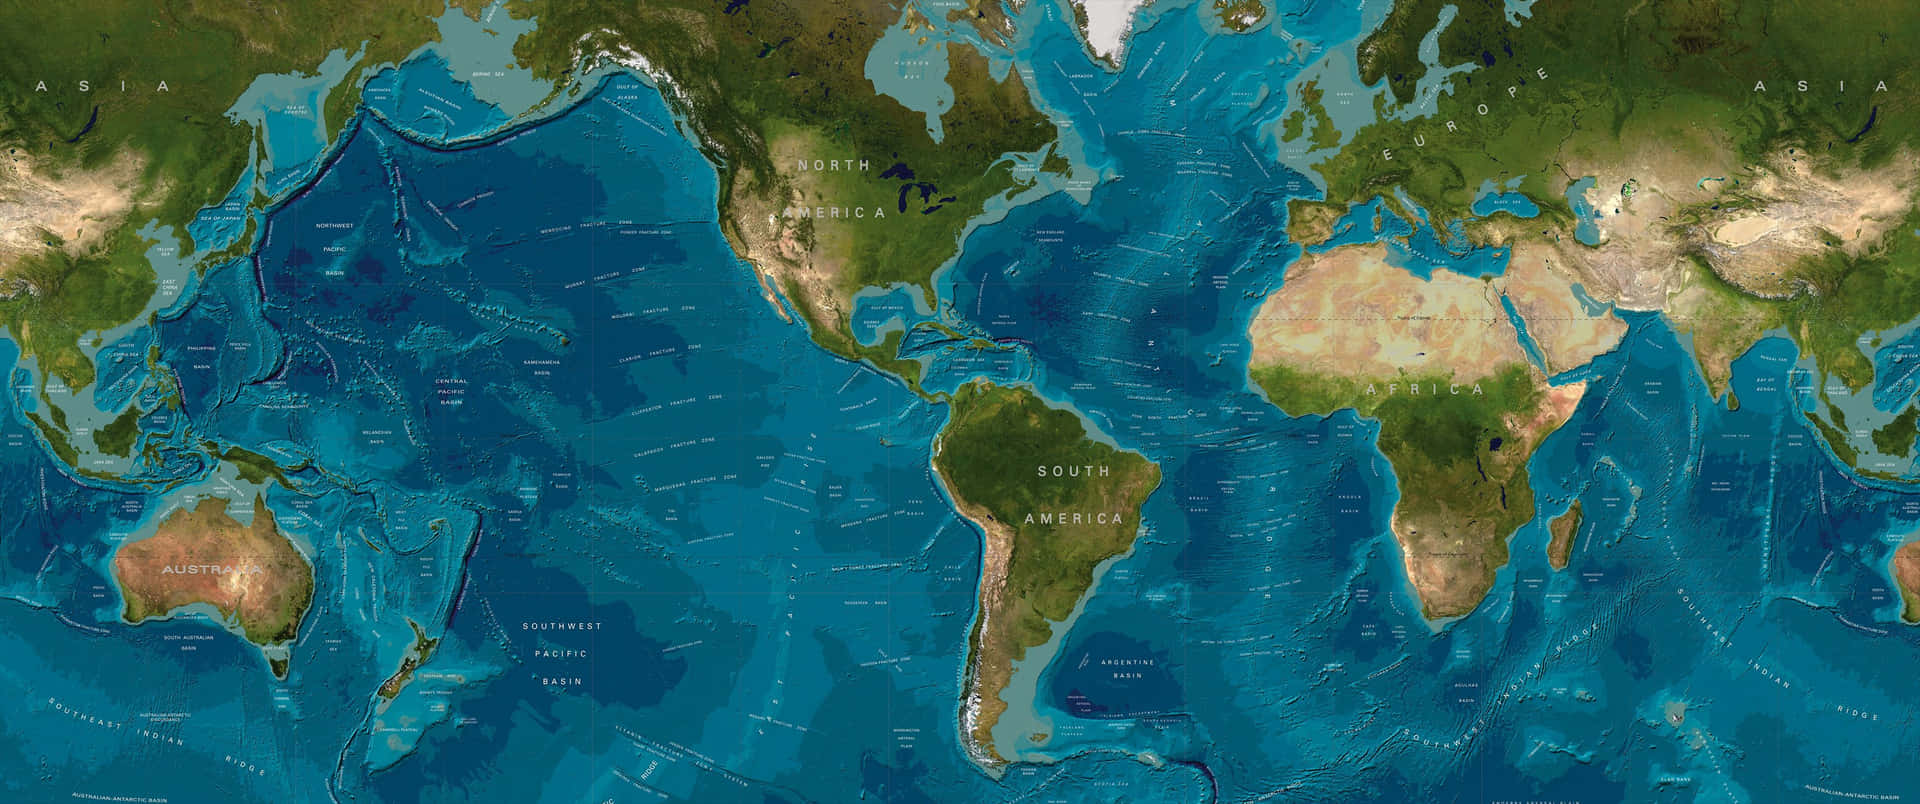 The World Map Is Shown In Blue And Blue Wallpaper